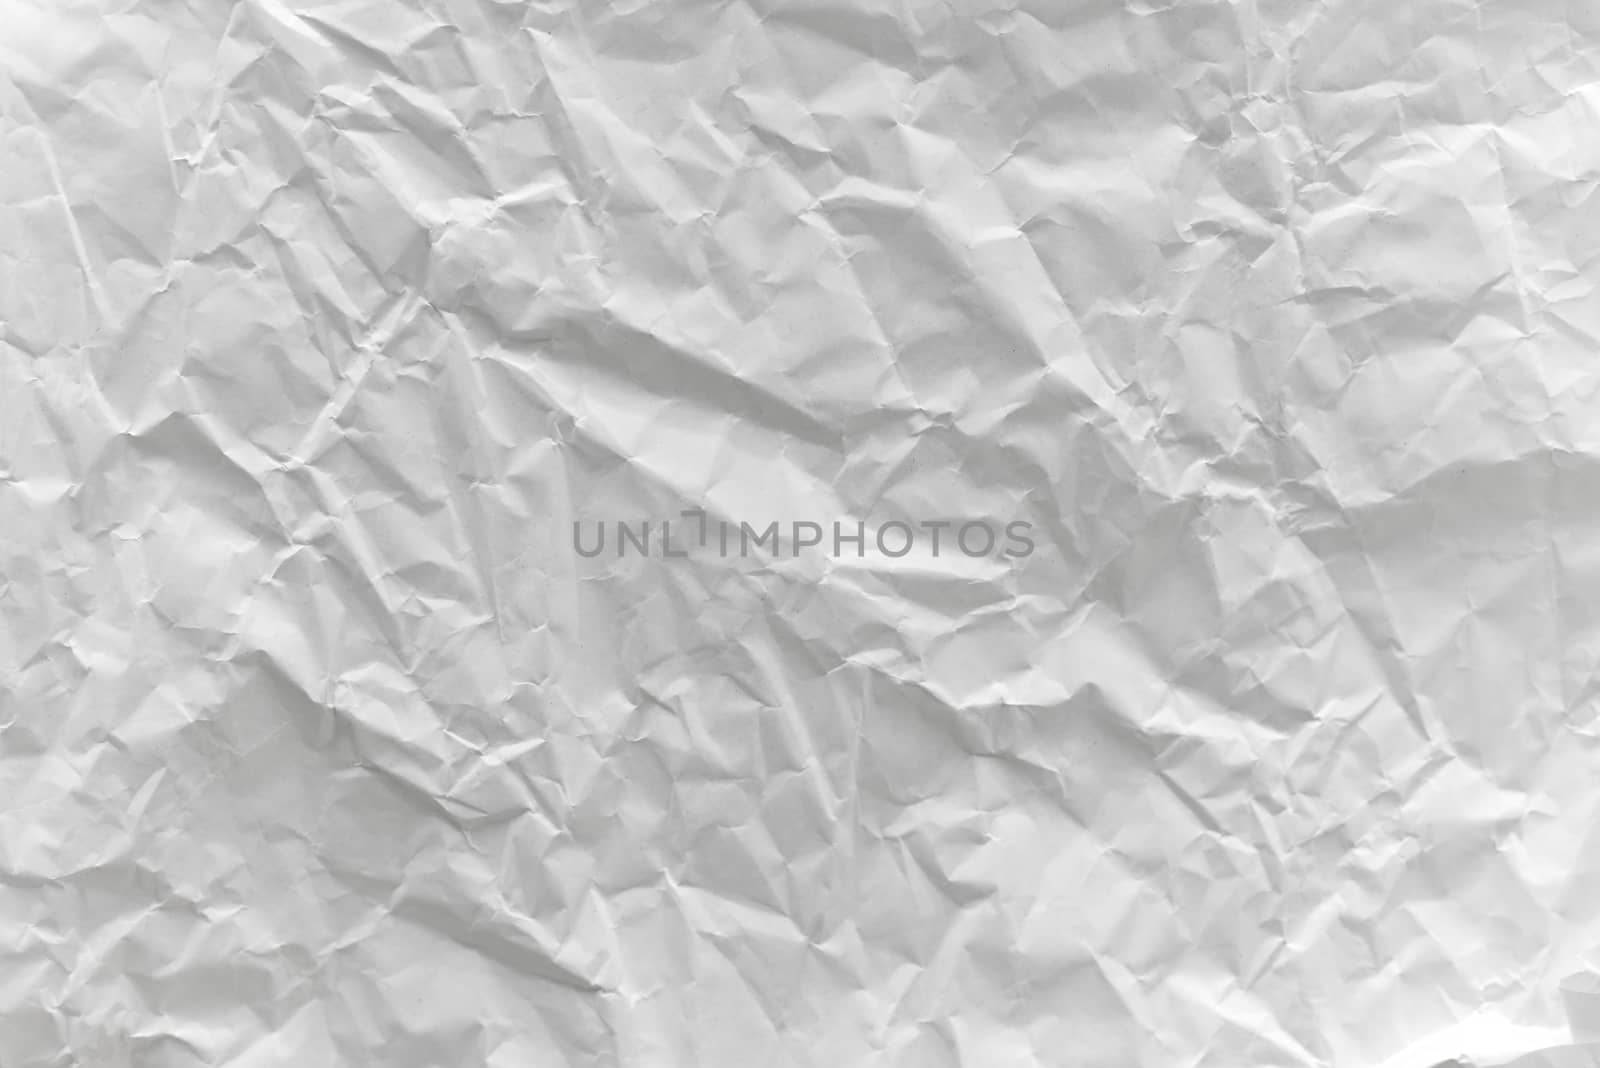 Wrinkled creases on white paper or White crumpled paper texture background.